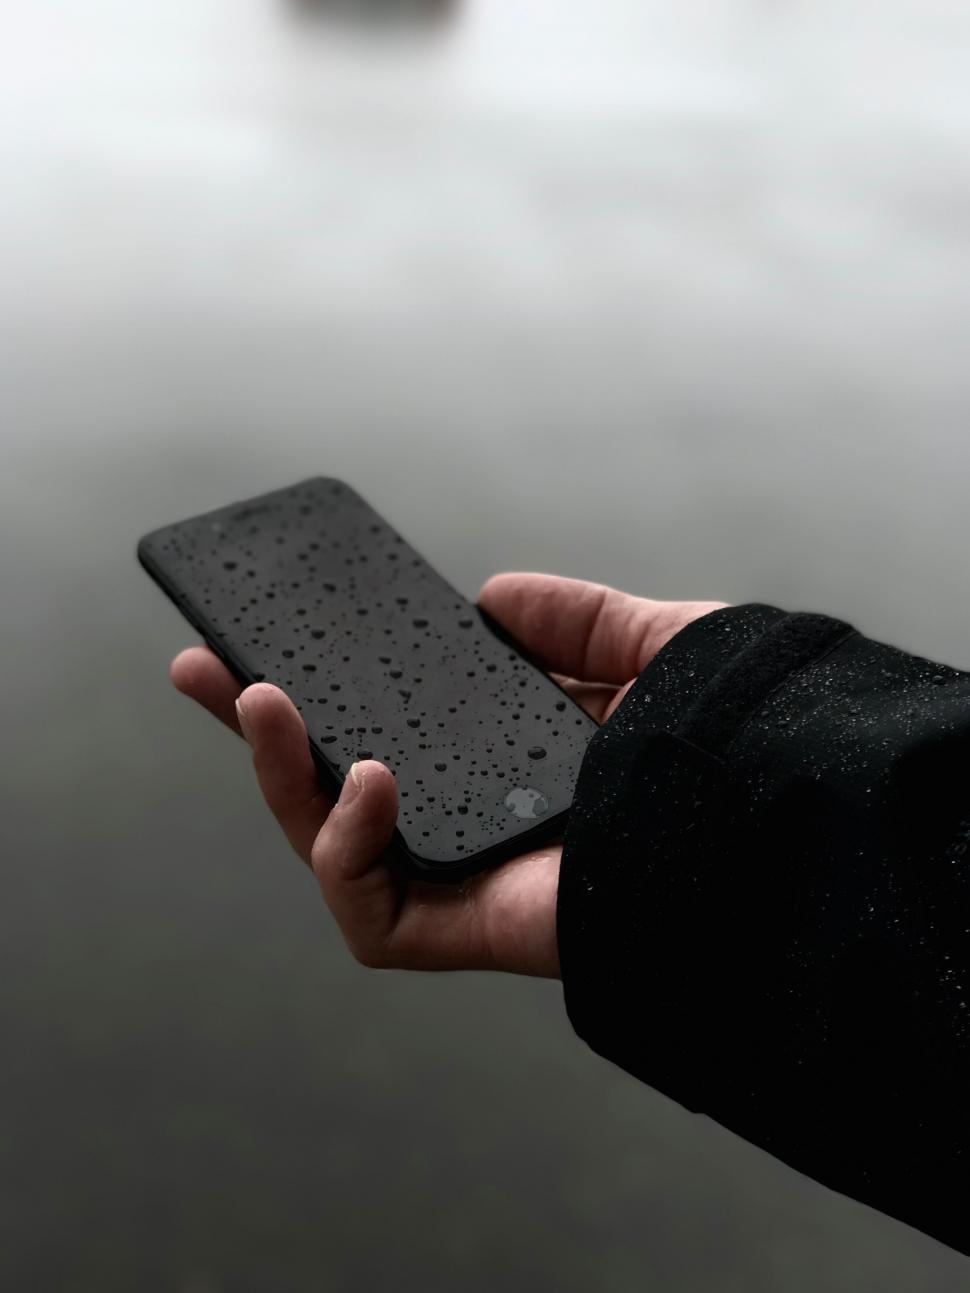 Free Image of Hand holding a wet smartphone 